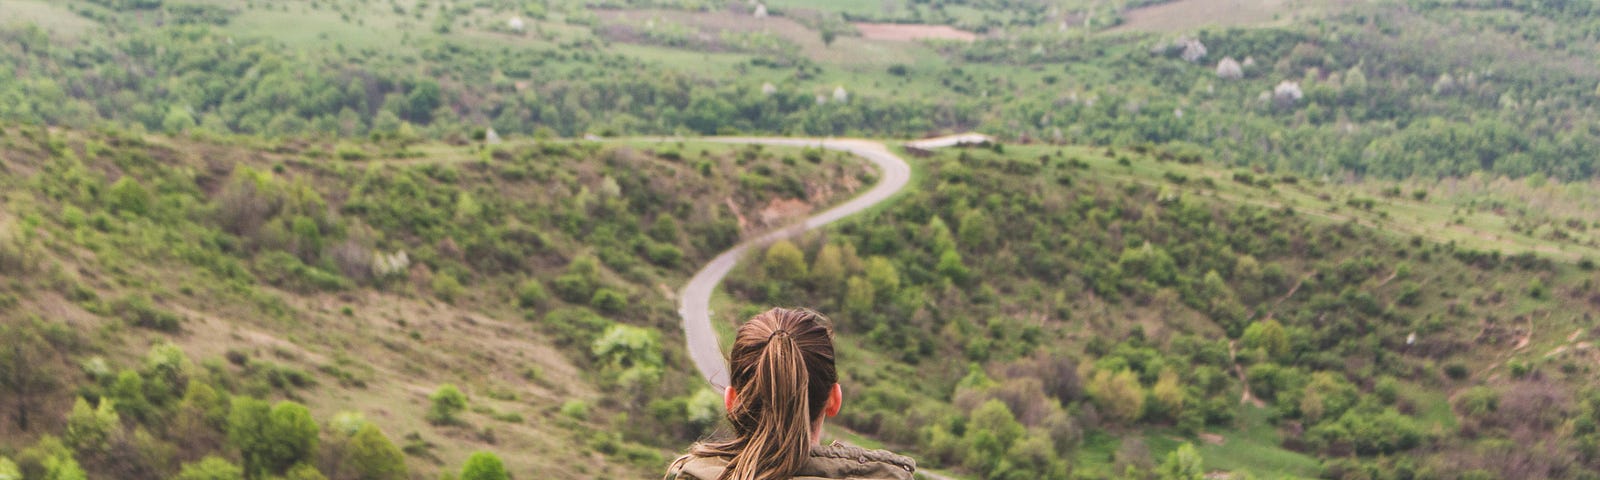 woman sitting on the edge of a cliff overlooking a green valley and a winding road